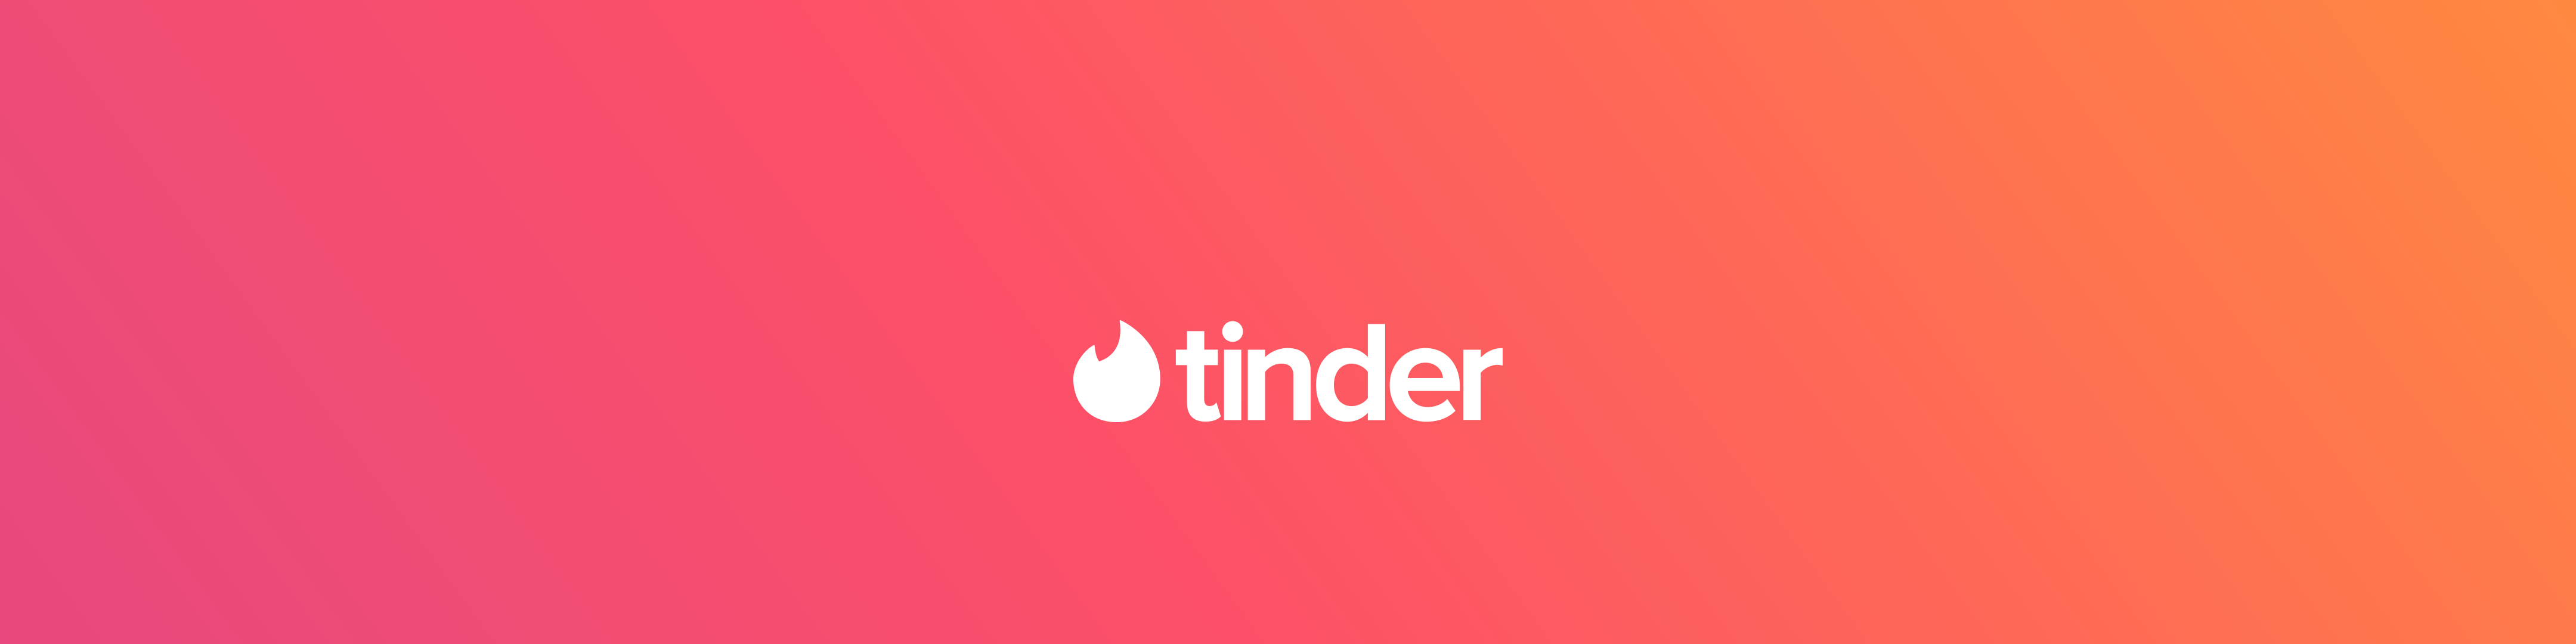 Tinder is now bypassing the Play Store on Android to avoid Google’s 30 percent cut